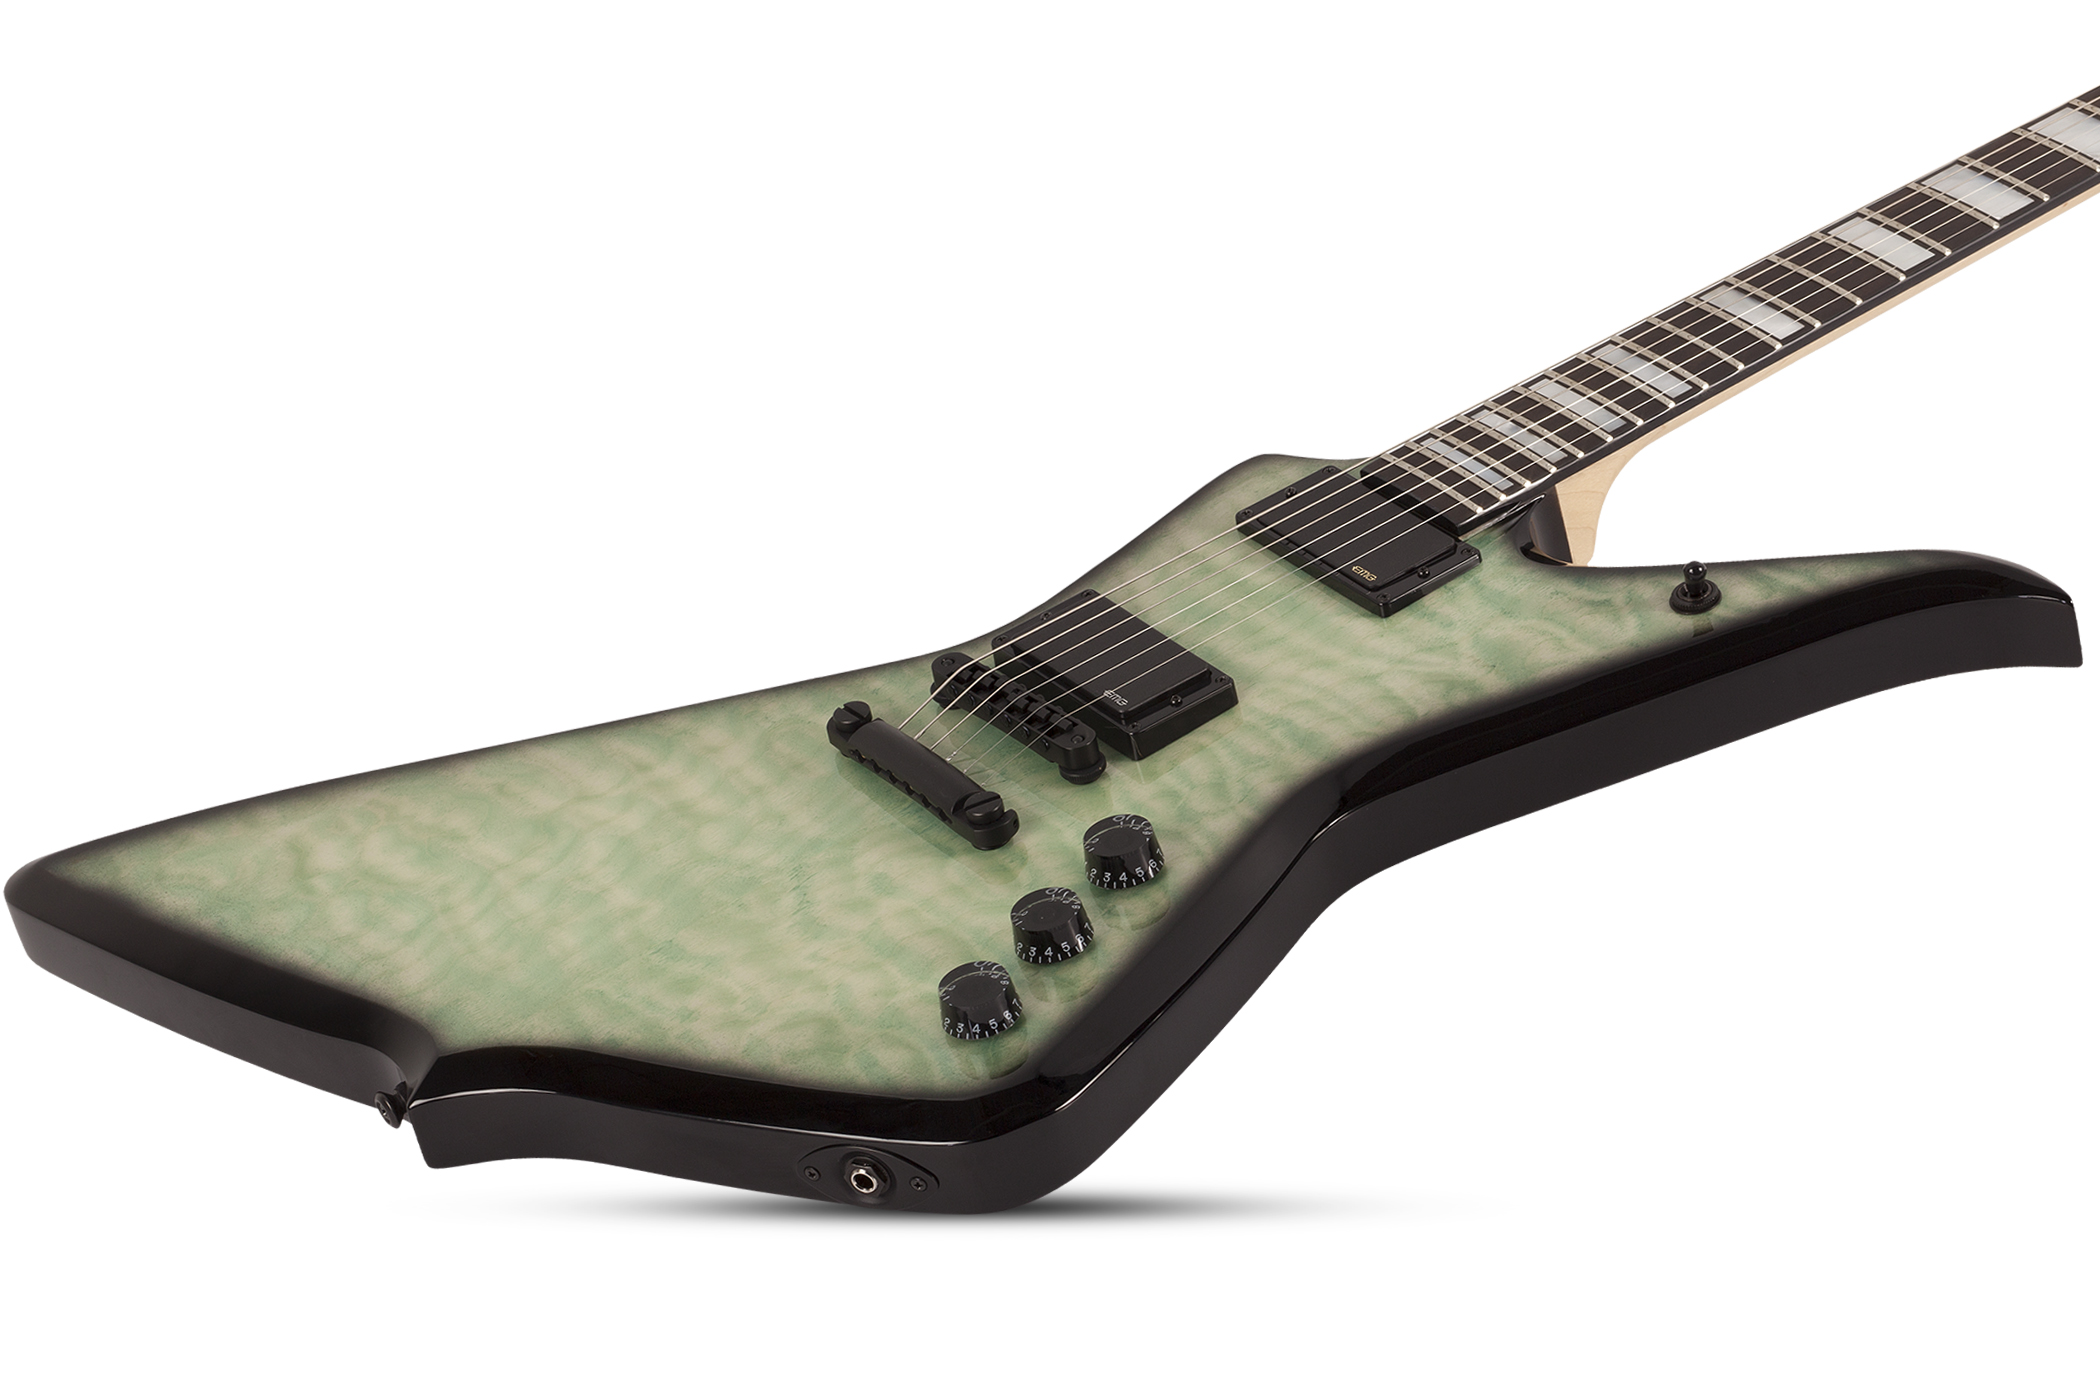 Wylde Audio Blood Eagle Hh Ht Eb - Nordic Ice - Metal electric guitar - Variation 1